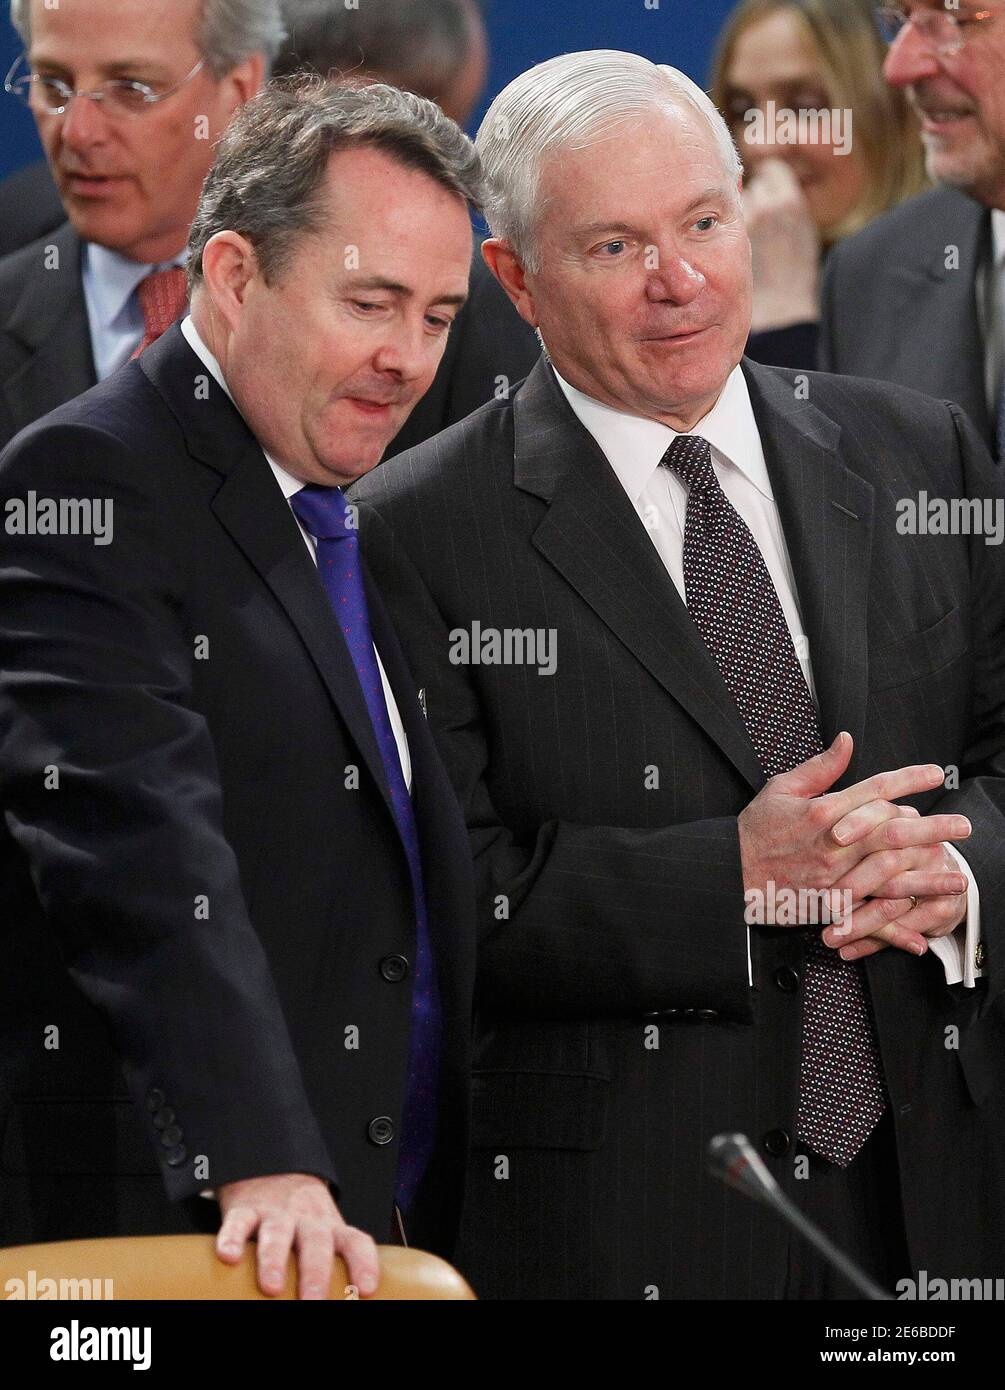 Britain's Defence Secretary Liam Fox (L) talks with U.S. Defense Secretary Robert Gates (R) at a NATO defence ministers meeting (NAC) at the Alliance headquarters in Brussels March 10, 2011. NATO defence ministers meeting in Brussels on Thursday and Friday will discuss options to respond to the turmoil in Libya, including a possible no-fly zone, the officials said.      REUTERS/Yves Herman (BELGIUM - Tags: POLITICS CIVIL UNREST MILITARY) Stock Photo